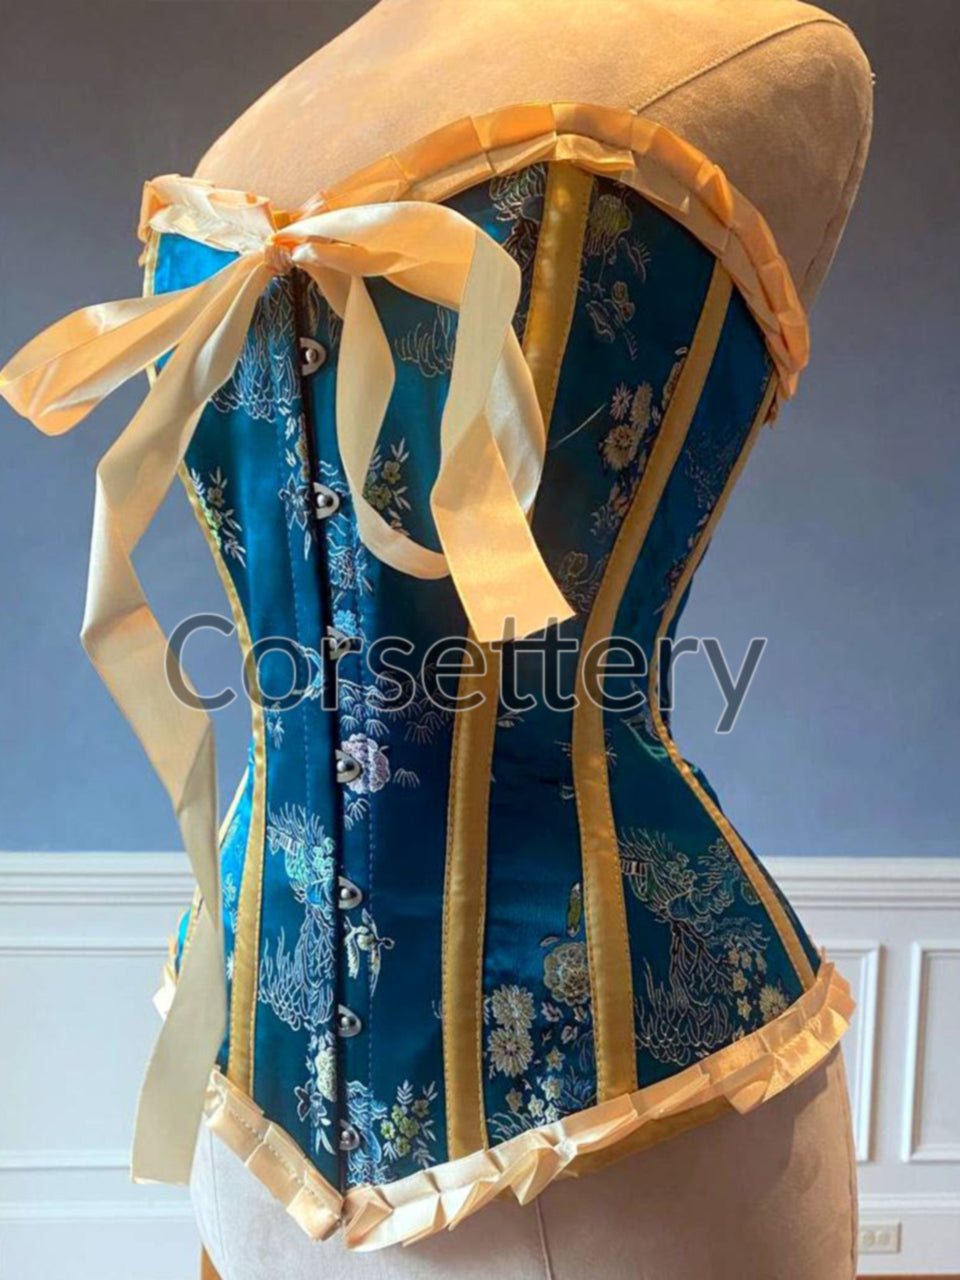 
                  
                    Bright blue brocade steampunk corset with ribbons and bow. Steel-boned corset for tightlacing. Prom, gothic, steampunk Victorian corset. Corsettery
                  
                